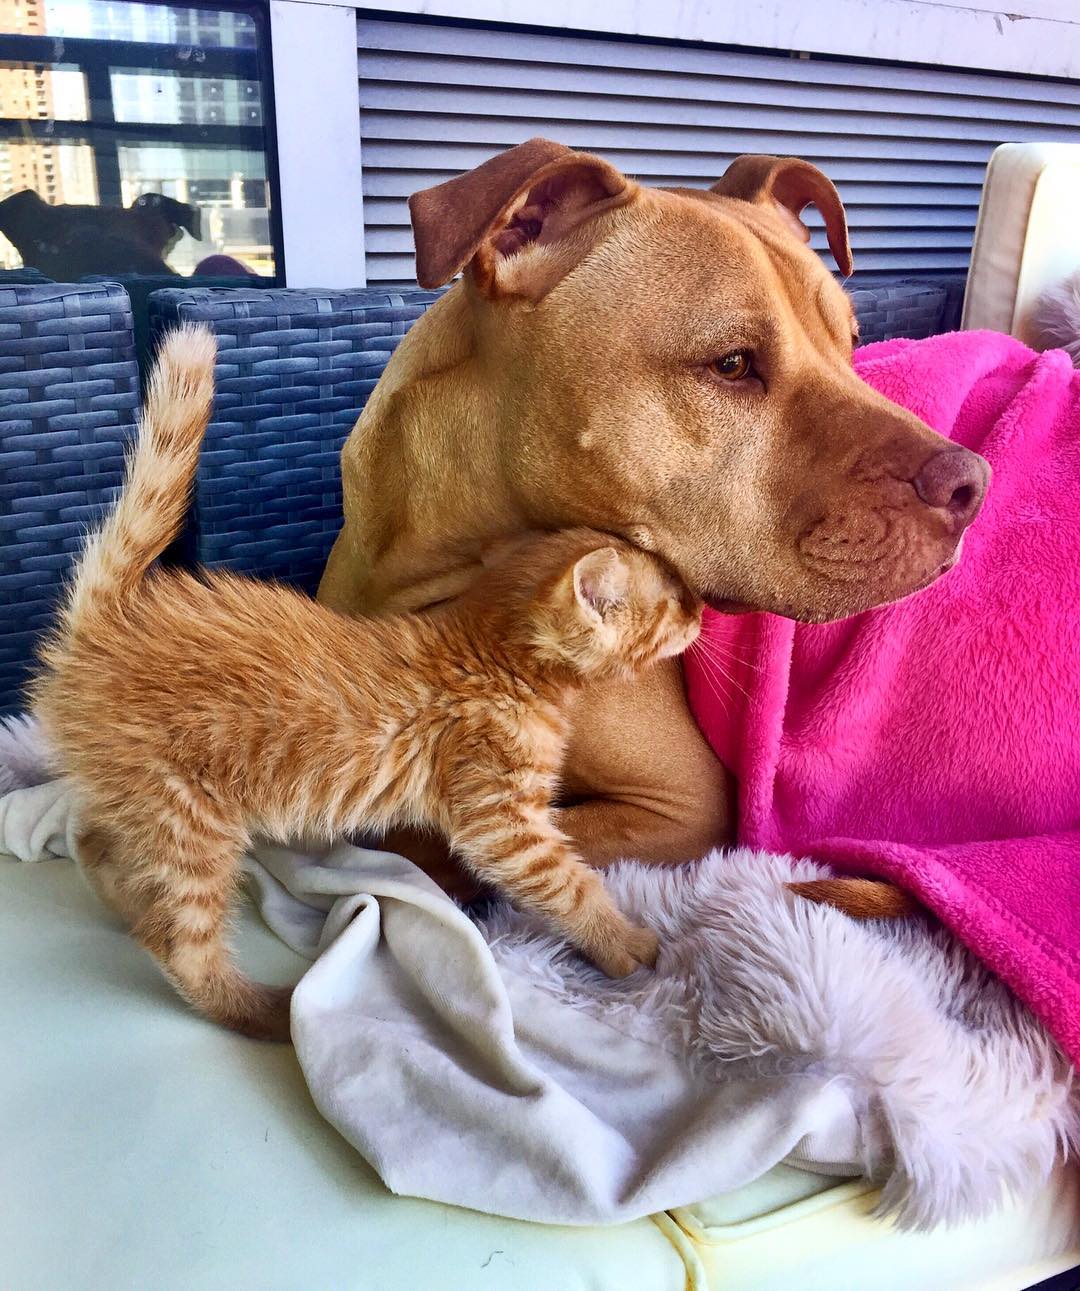 https://www.thedodo.com/rescue-pit-bull-adopted-kitten-1742584748.html